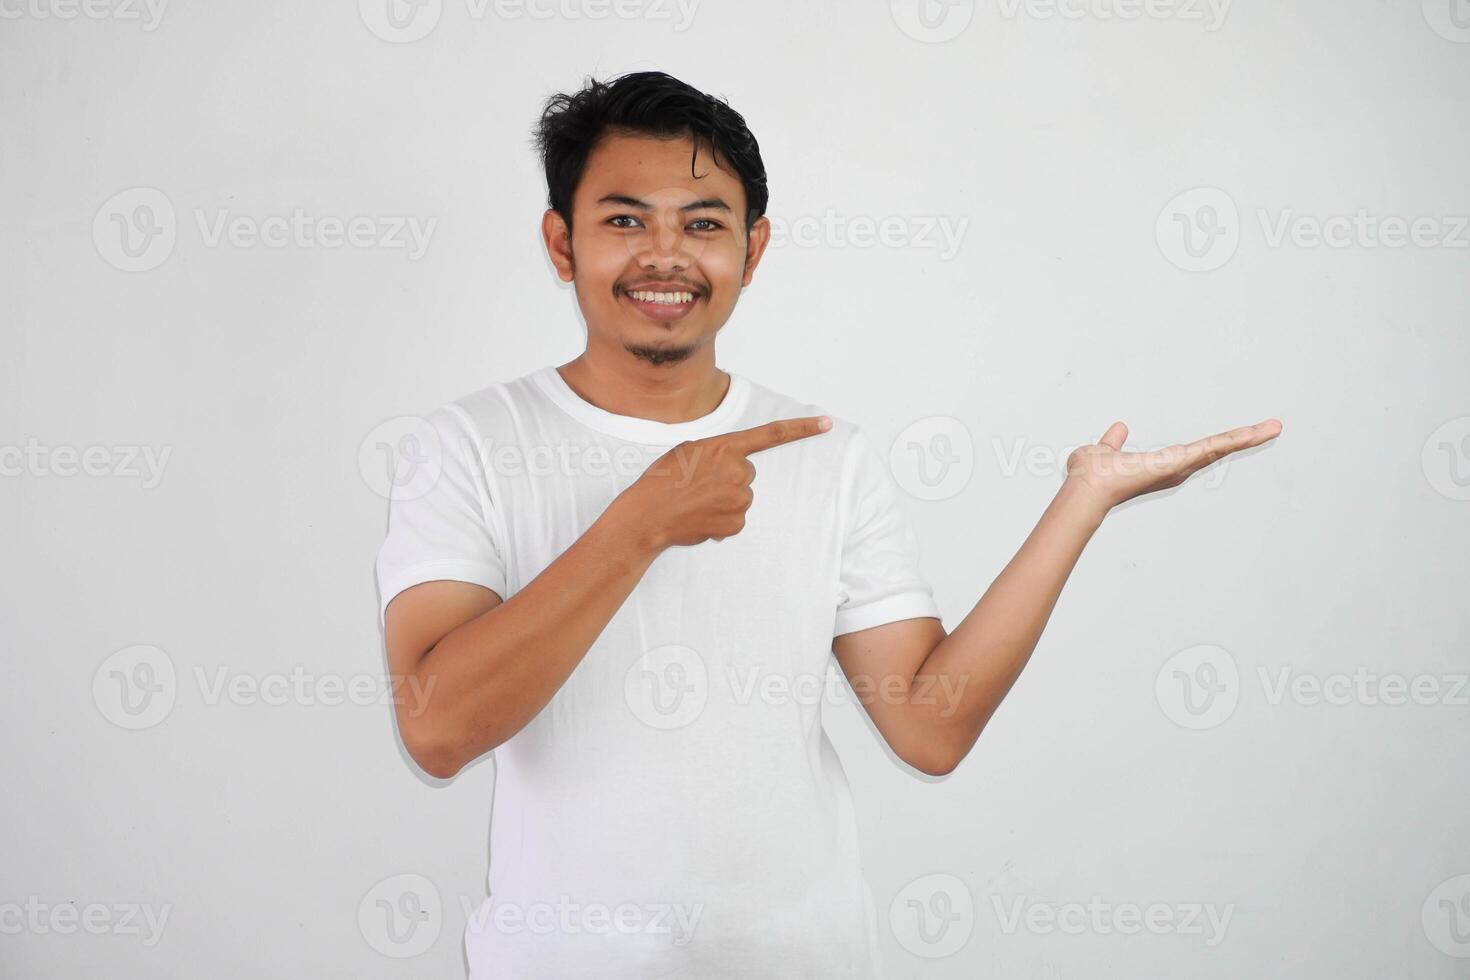 smiling asian man with an open hand with fingers pointing to the side wearing white t shirt isolated on white background photo